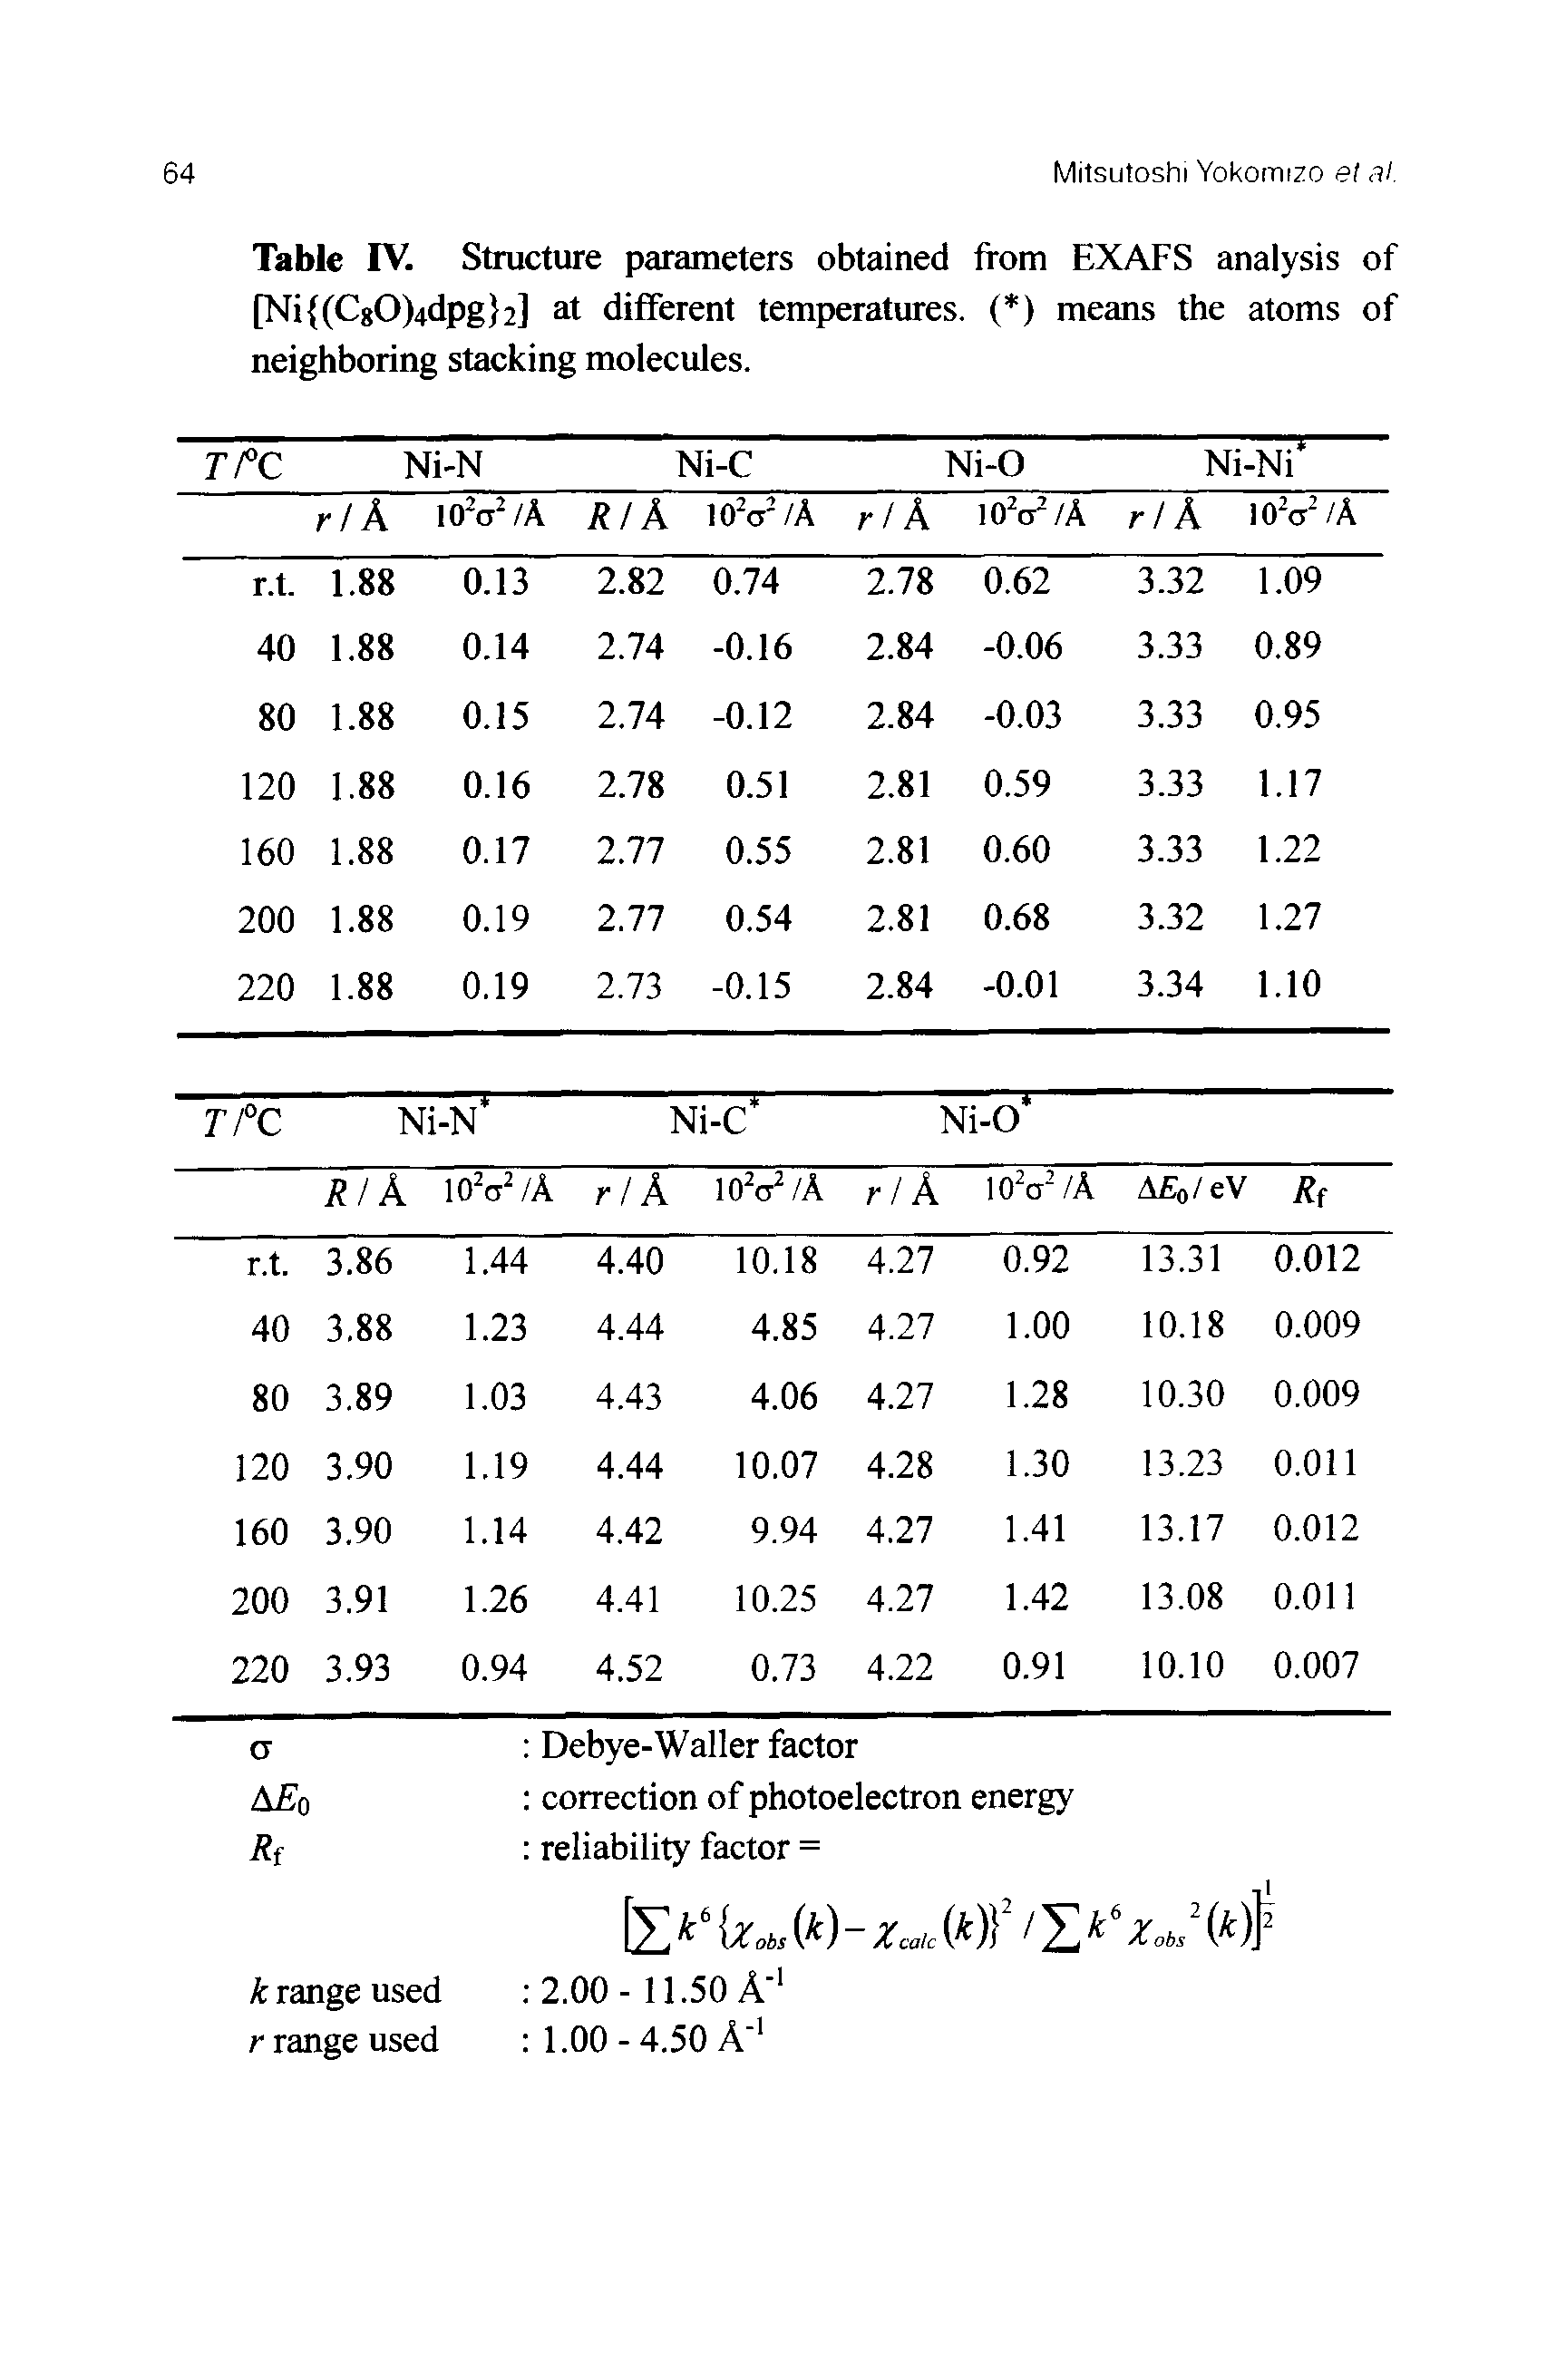 Table FV. Structure parameters obtained from EXAFS analysis of [Ni (CgO)4dpg 2] at different temperatures. ( ) means the atoms of neighboring stacking molecules.